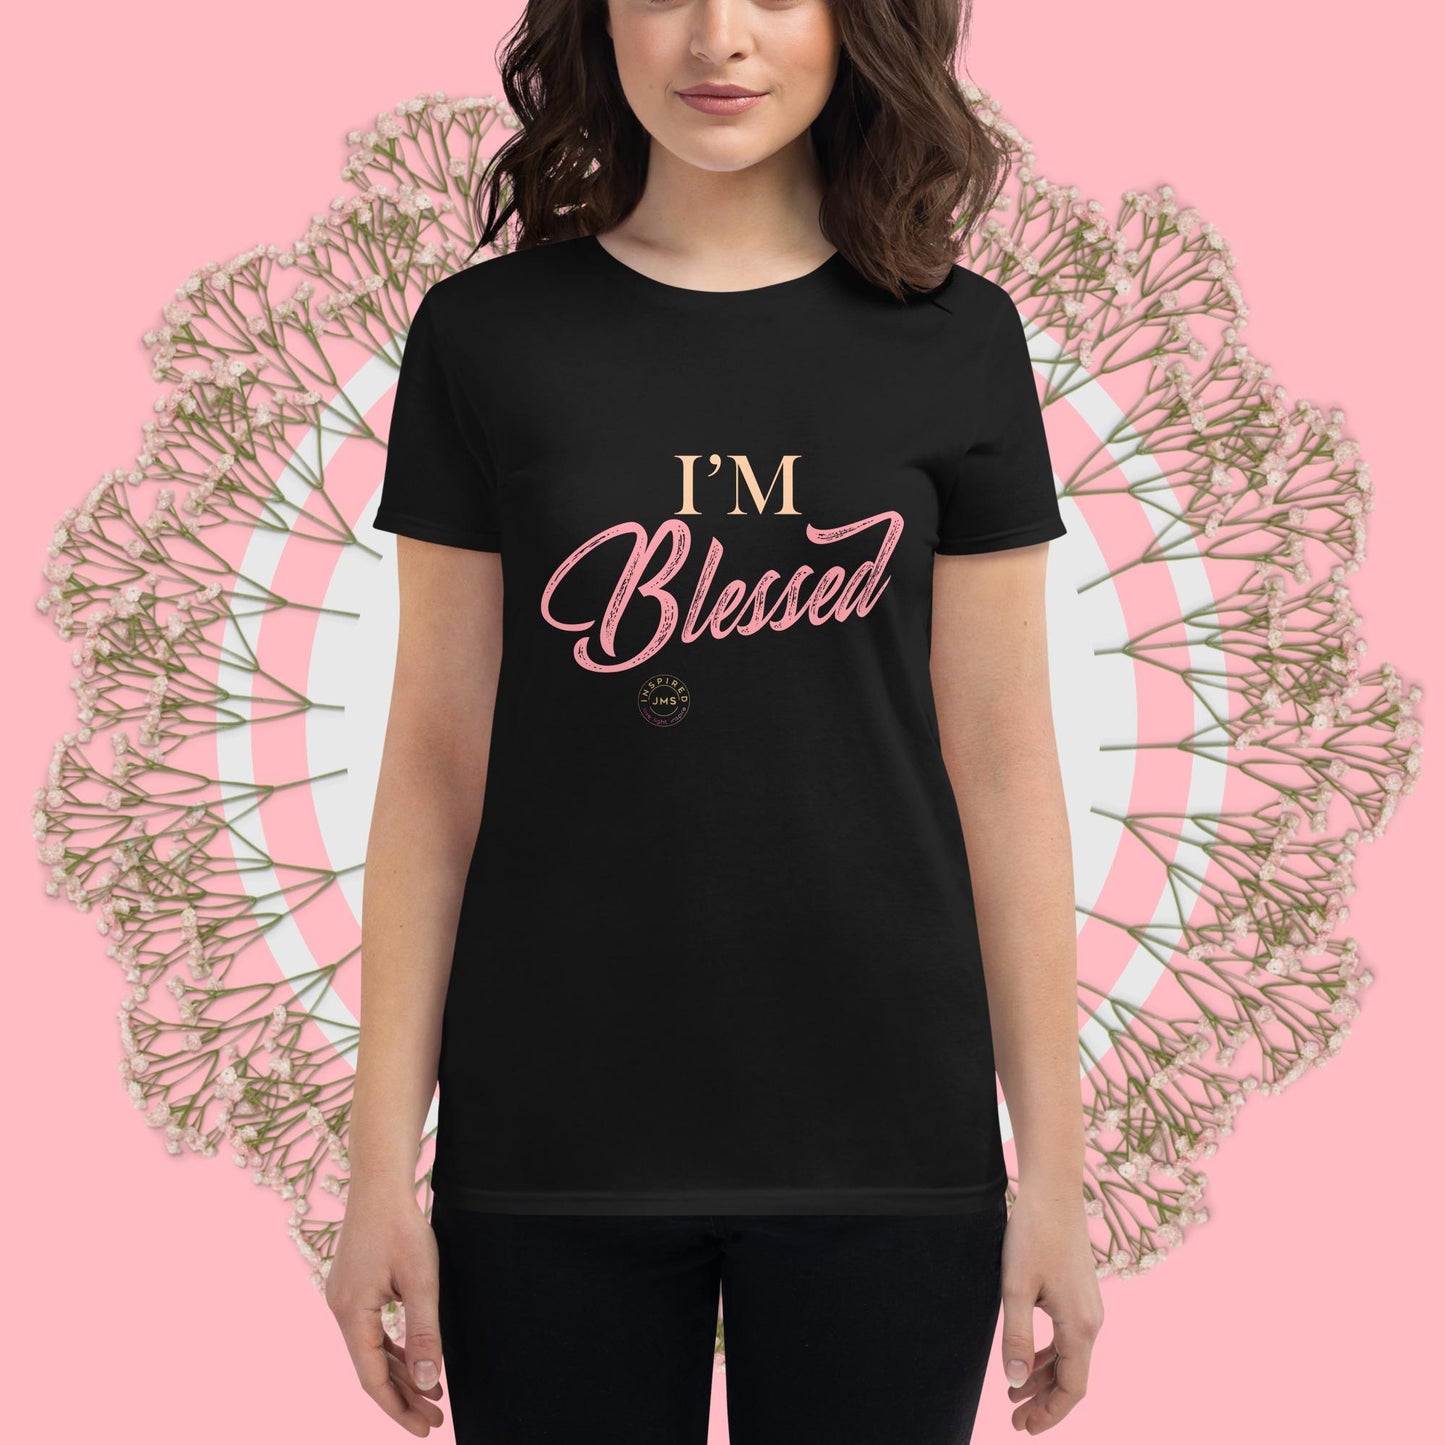 I'M Blessed Fit Tee